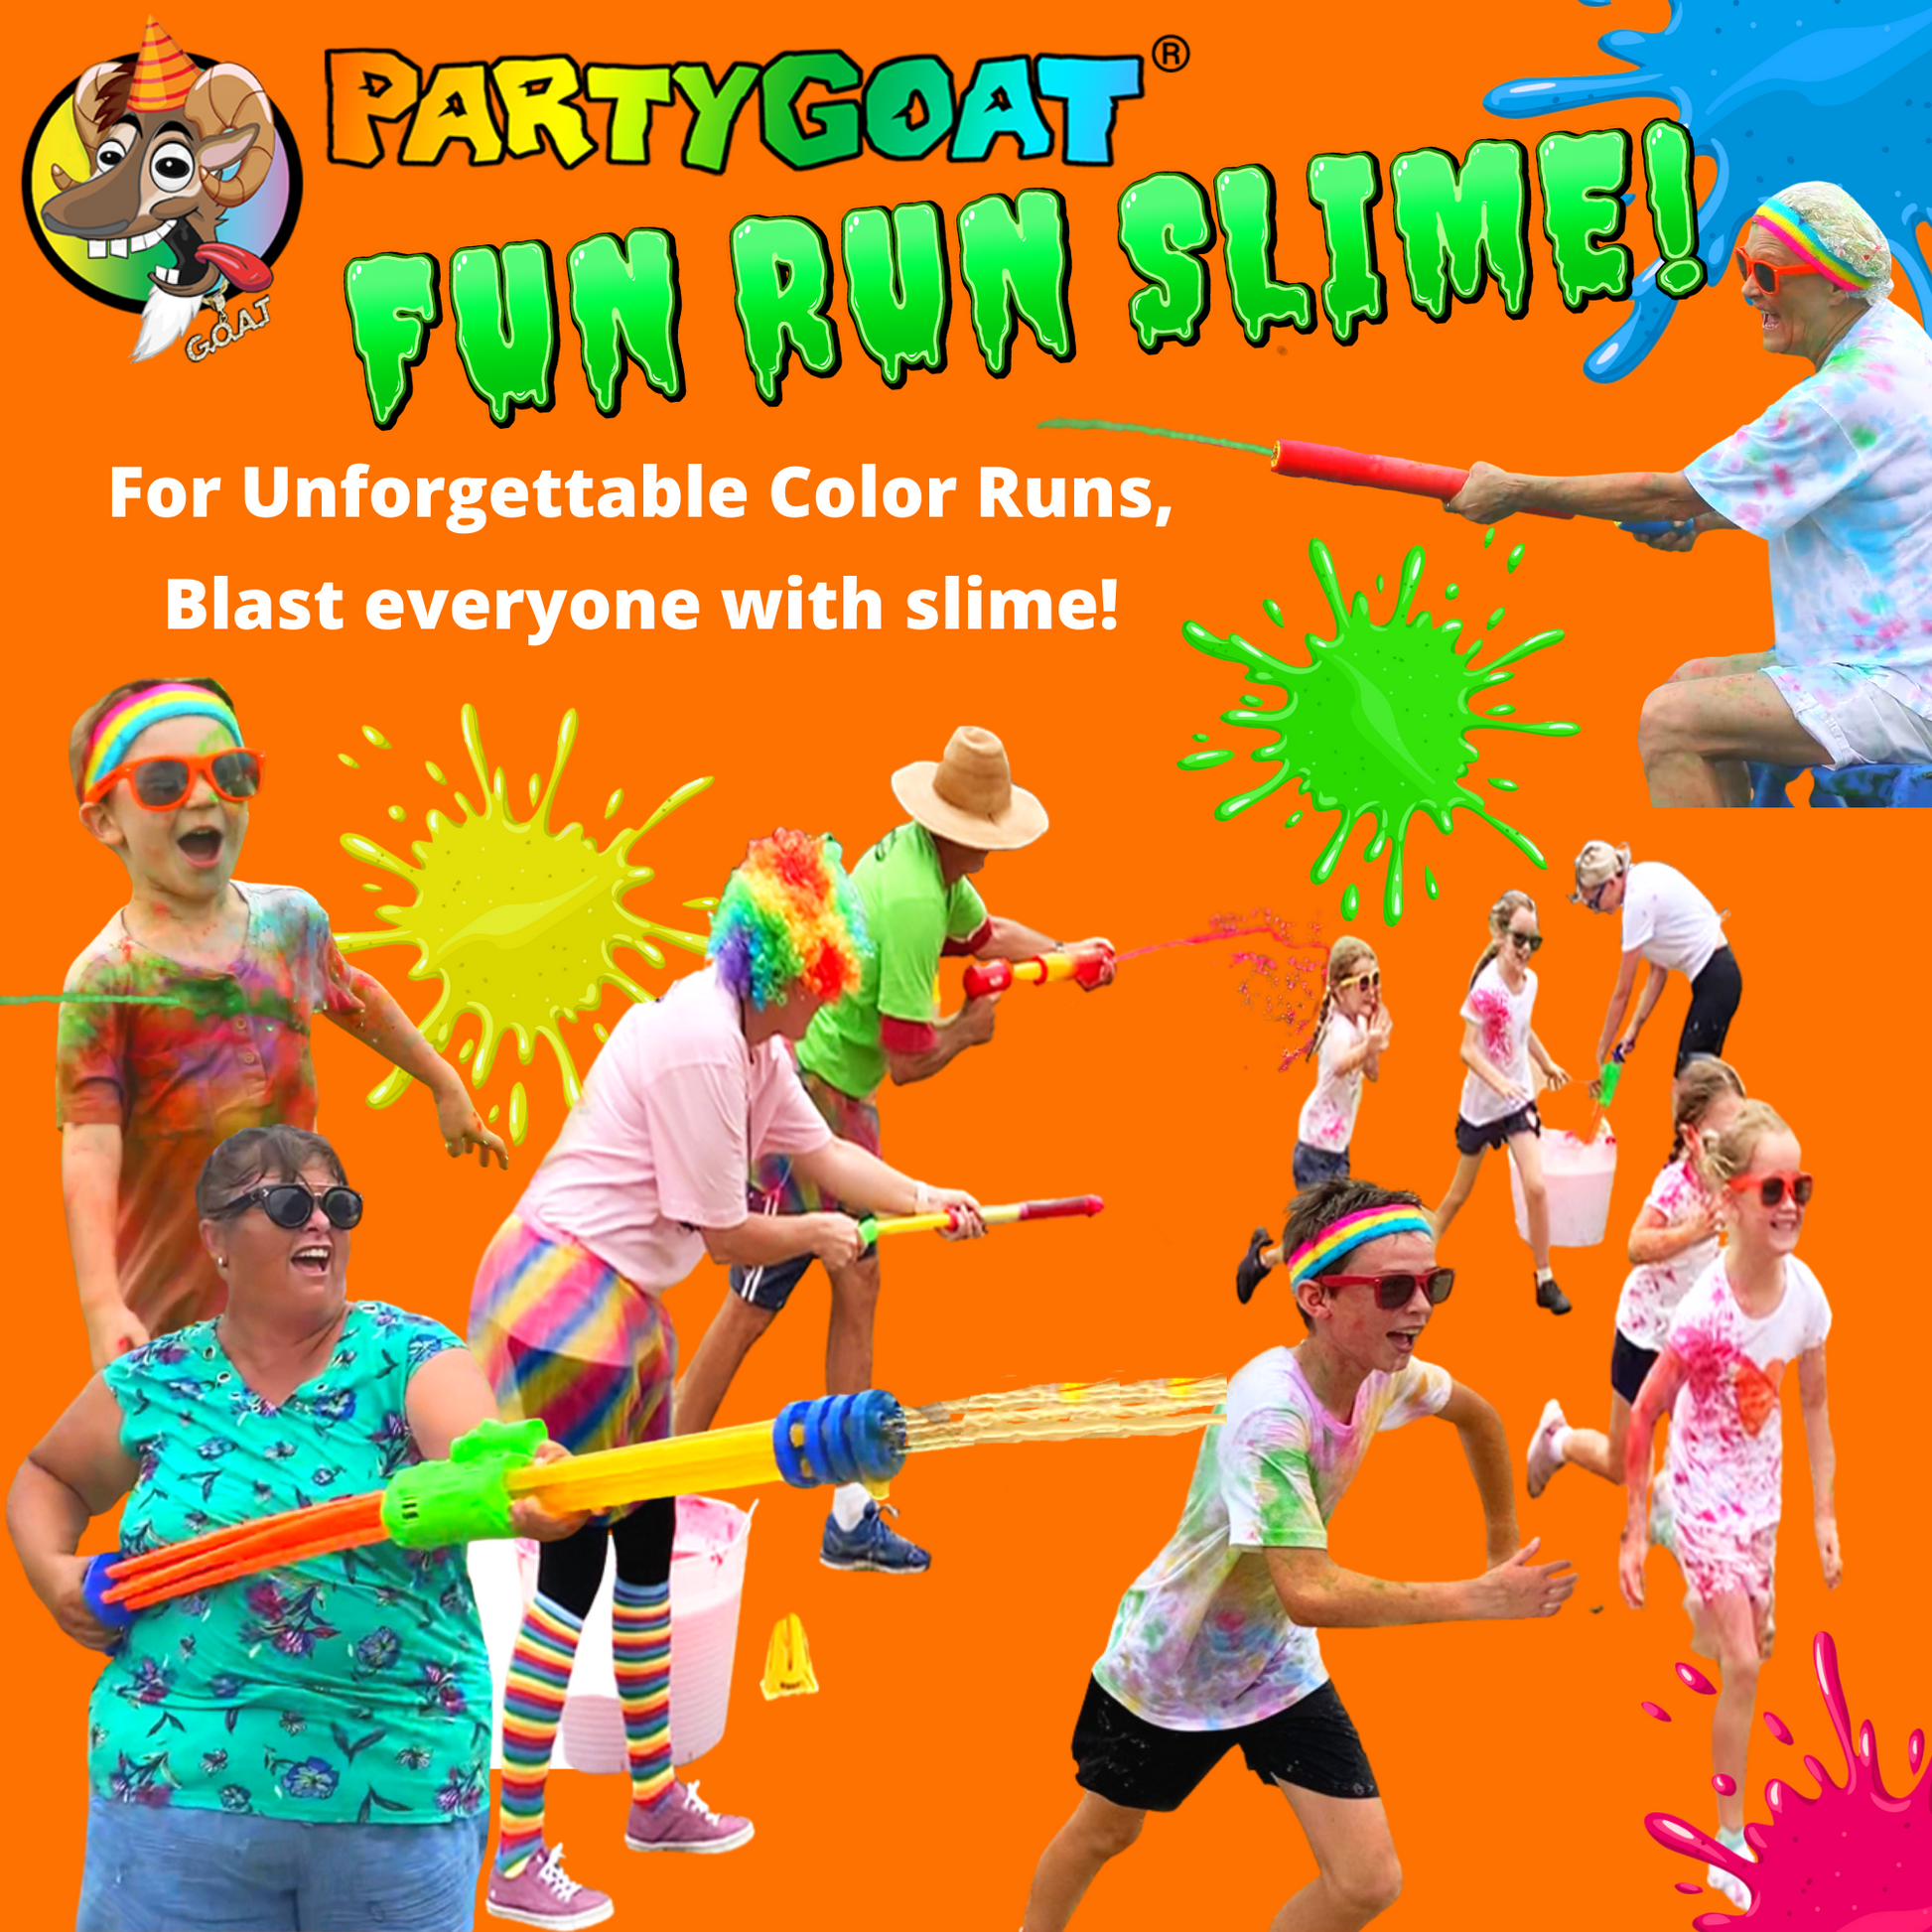 Bulk Instant Slime Powder! Mix with Water to Make a Huge 40 Gallons of  Slime! 4 Colors for Slime Bucket Challenges, Color Run, Blaster Gun, Bath